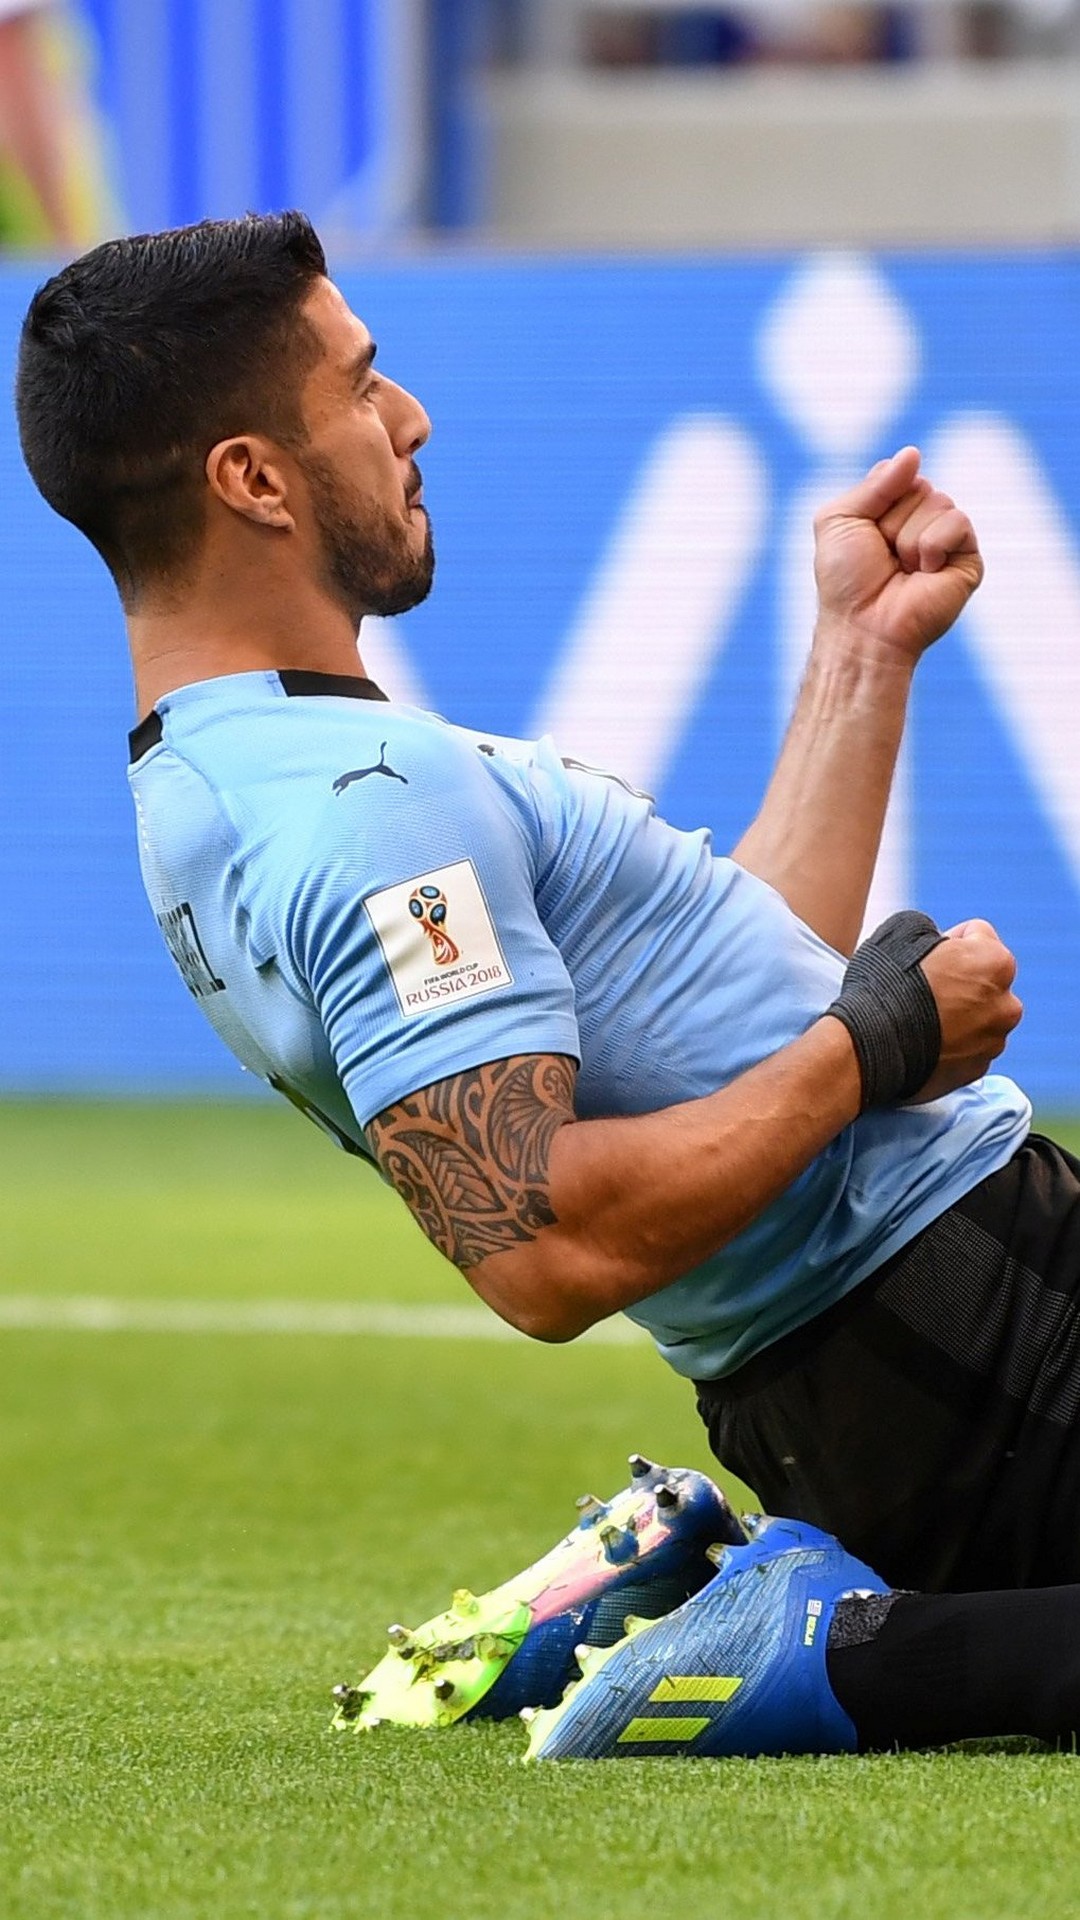 Wallpaper Luis Suarez Uruguay Android with image resolution 1080x1920 pixel. You can make this wallpaper for your Android backgrounds, Tablet, Smartphones Screensavers and Mobile Phone Lock Screen